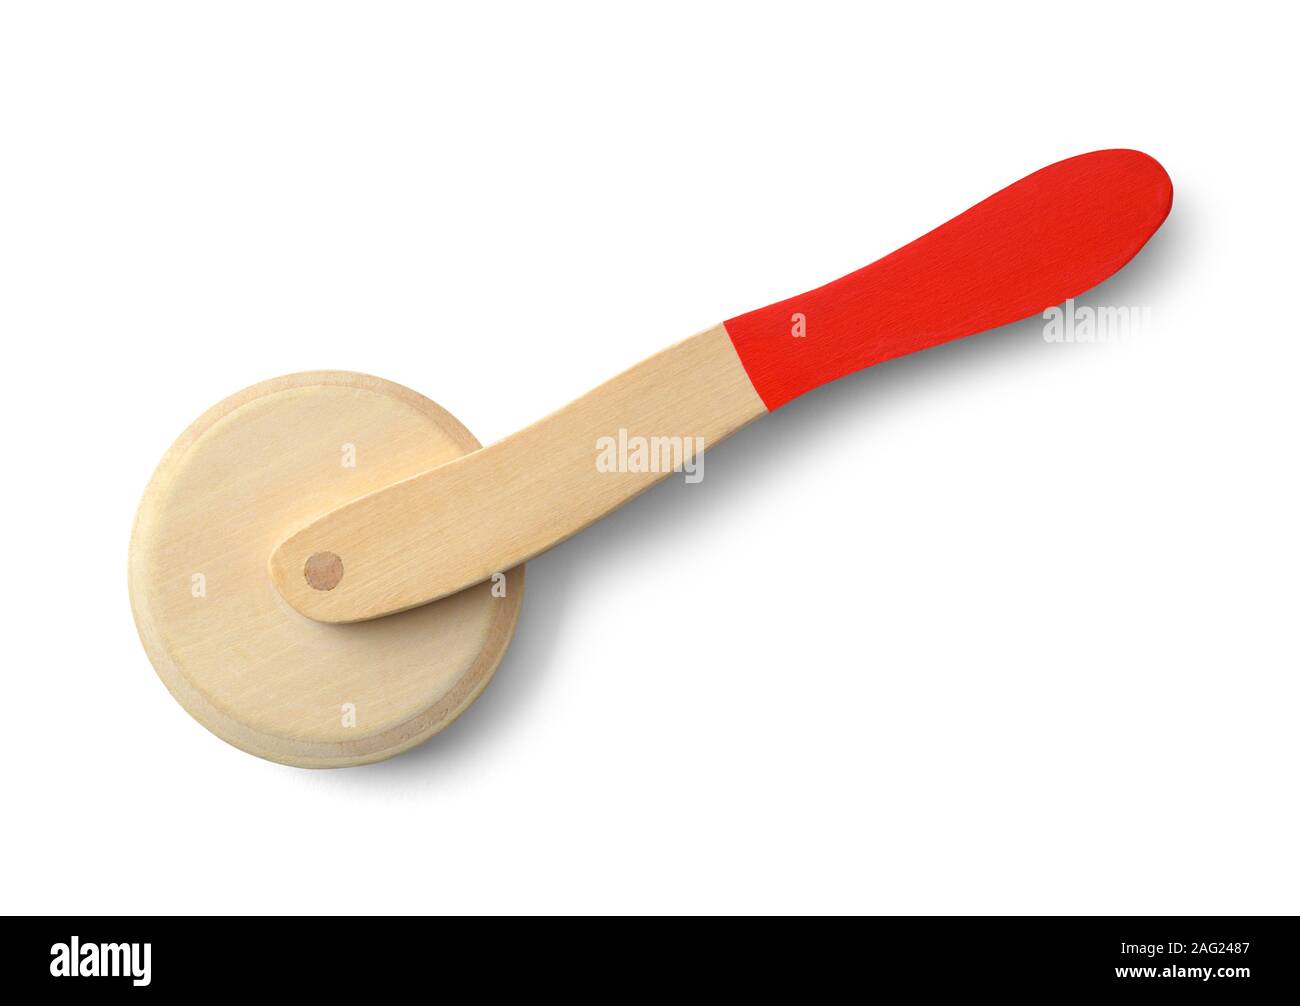 Toy Pizza Cutter Isolated on a White Background. Stock Photo